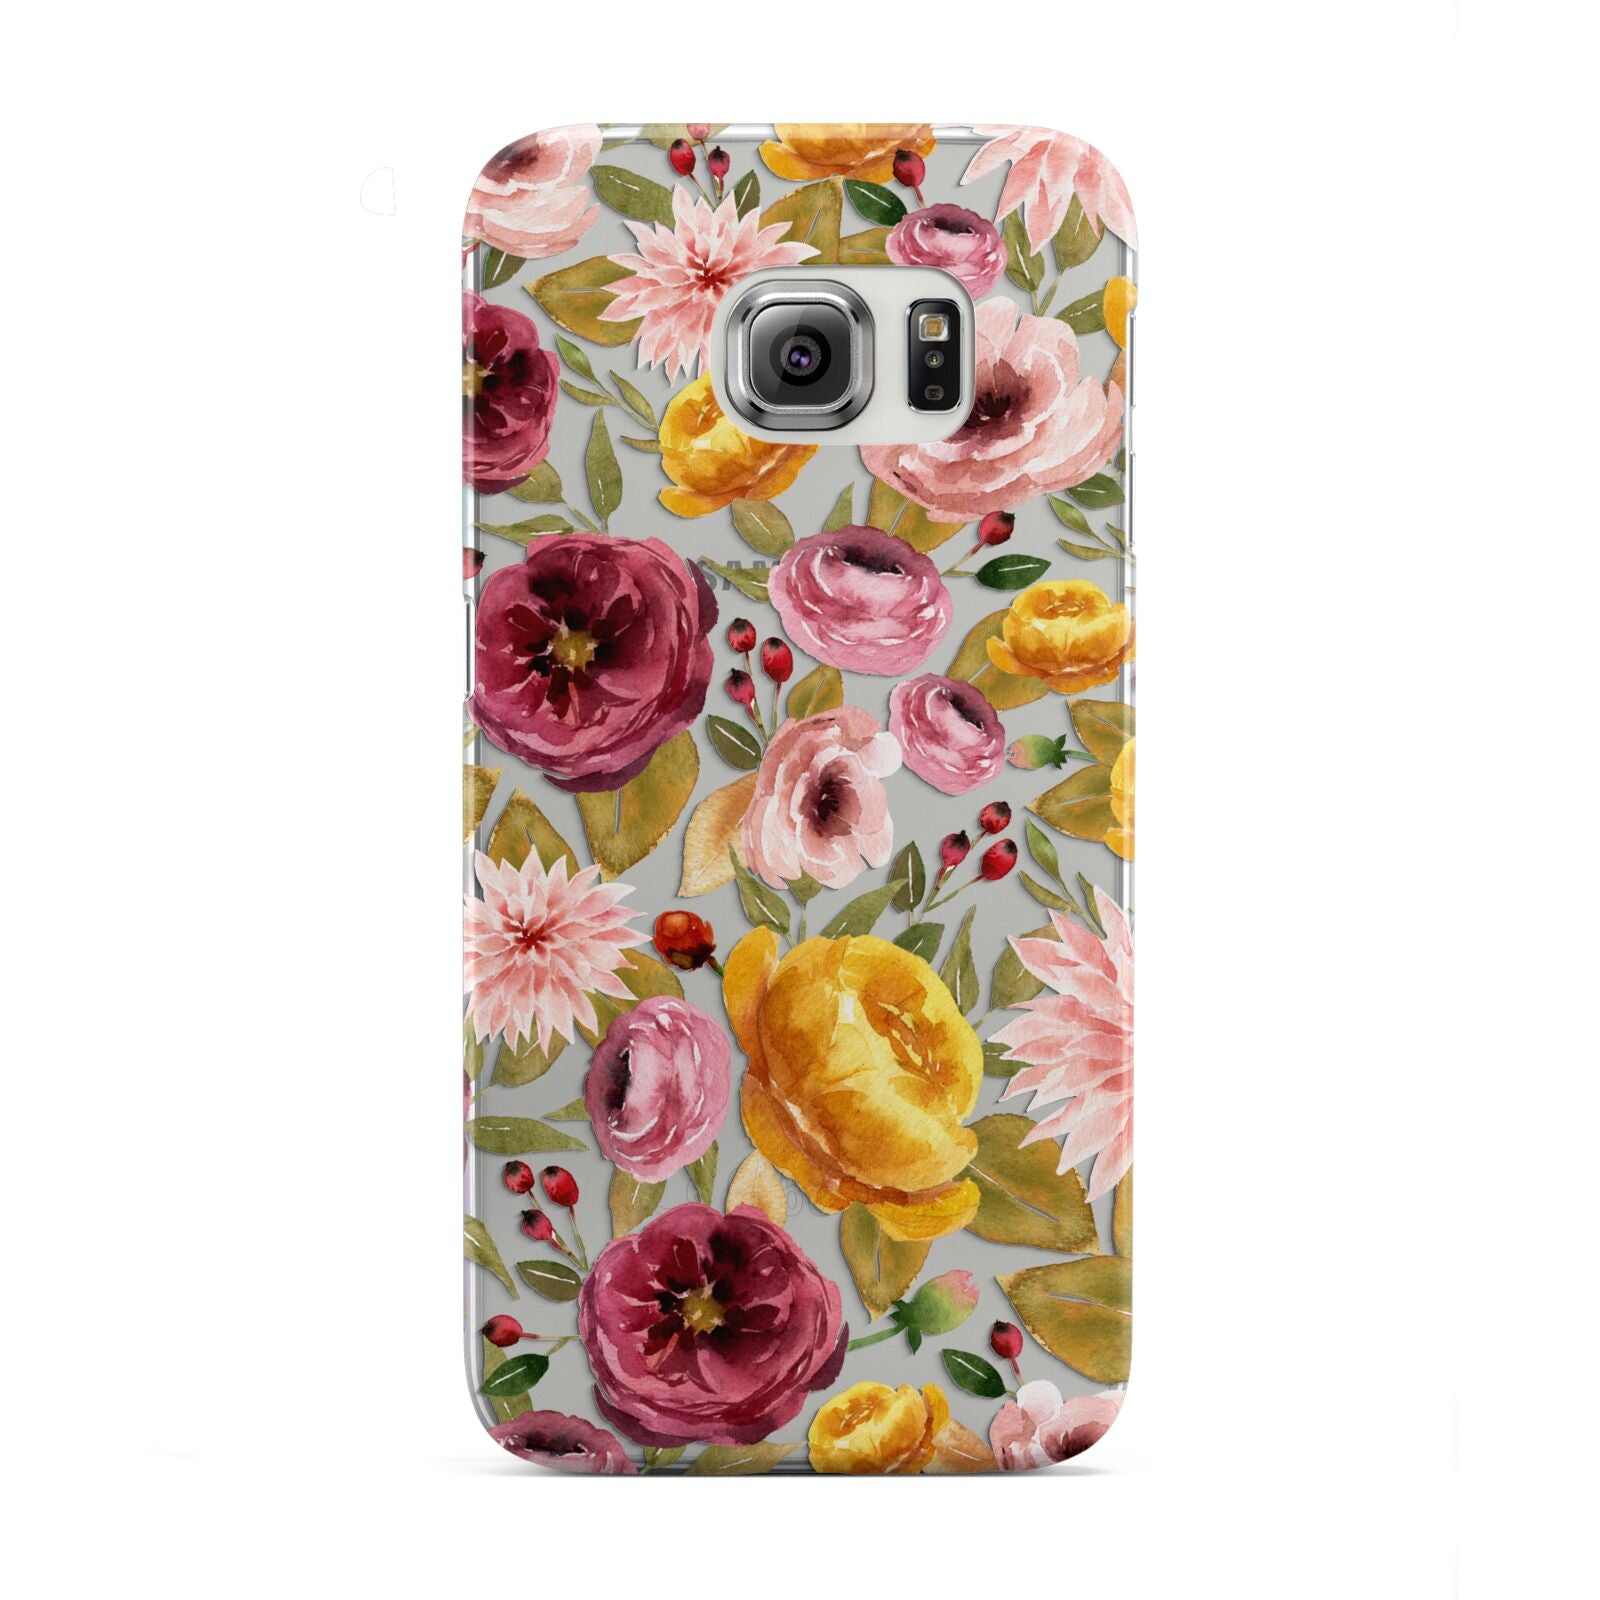 Pink and Mustard Floral Samsung Galaxy S6 Edge Case